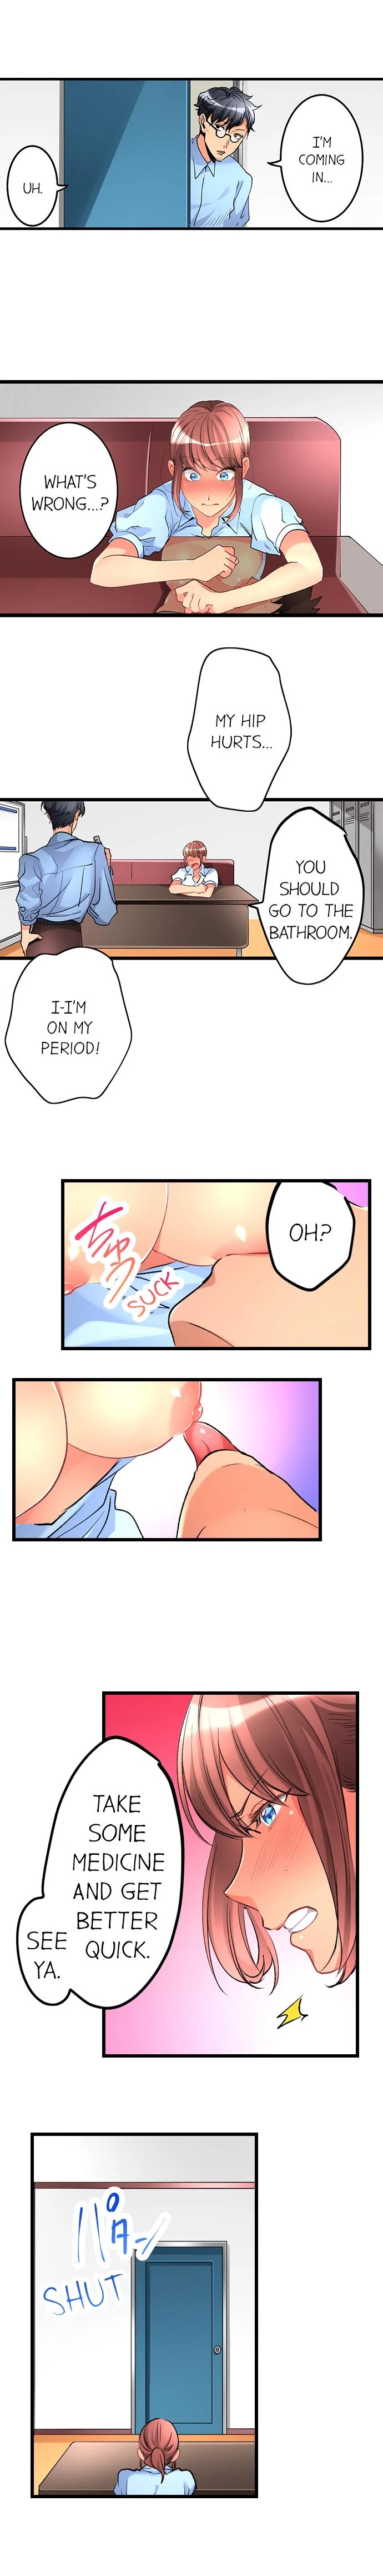 What She Fell On Was the Tip of My Dick - Chapter 29 Page 2